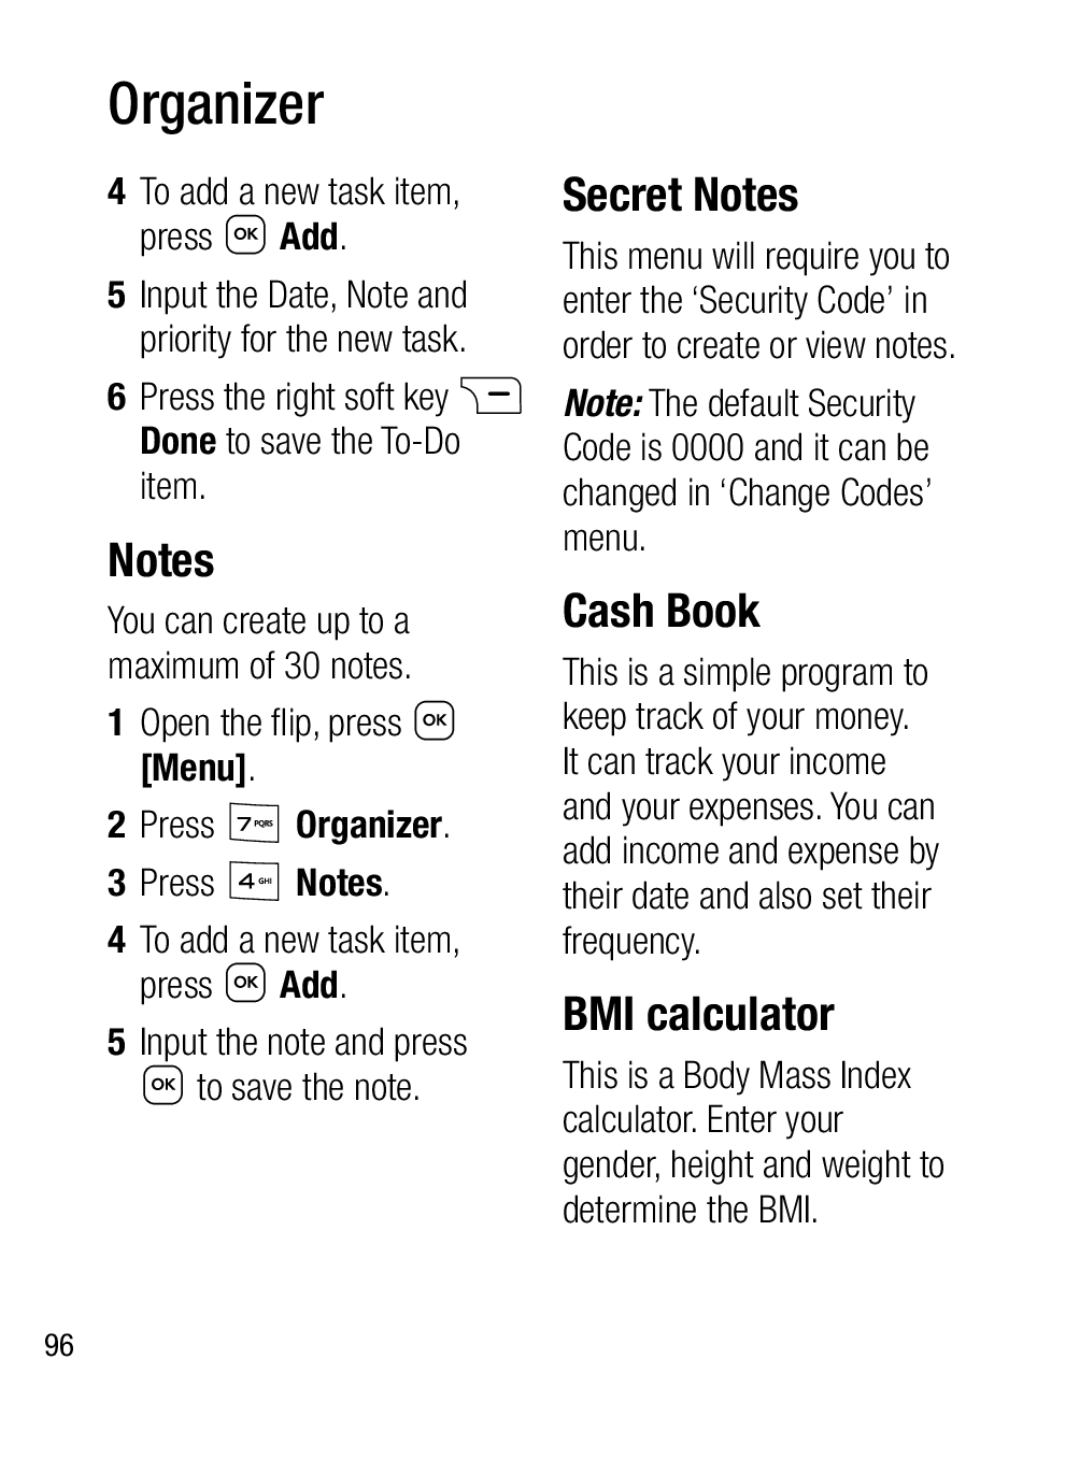 LG Electronics A133CH manual Secret Notes, Cash Book, BMI calculator, To add a new task item, press Add, to save the note 